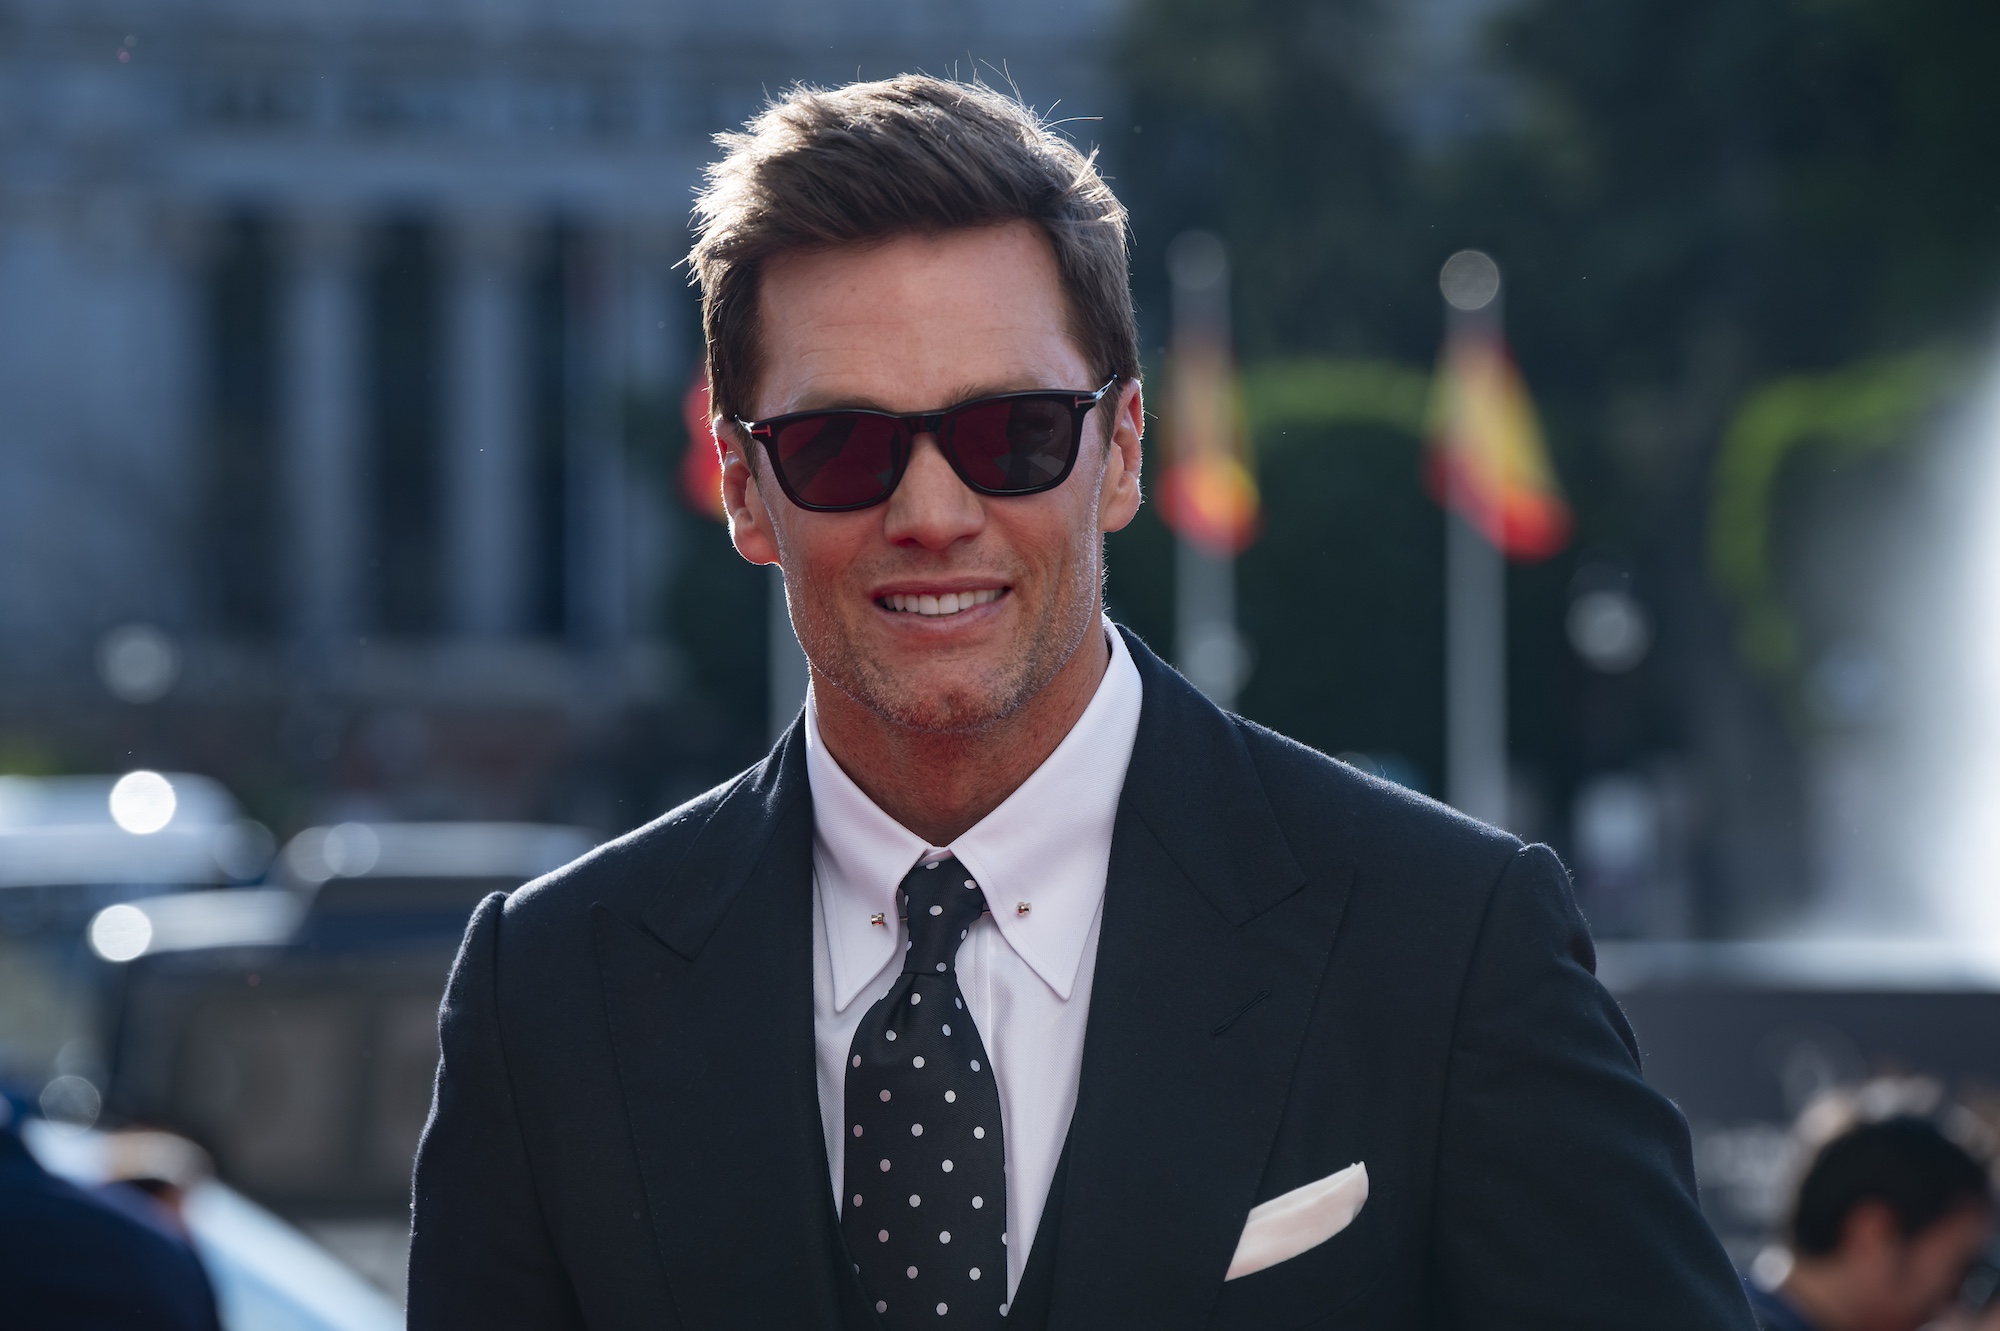 MADRID, SPAIN - APRIL 22: Tom Brady seen arriving at Palacio De Cibeles on April 22, 2024 in Madrid, Spain. (Photo by Alberto Gardin/Eurasia Sport Images/Getty Images)